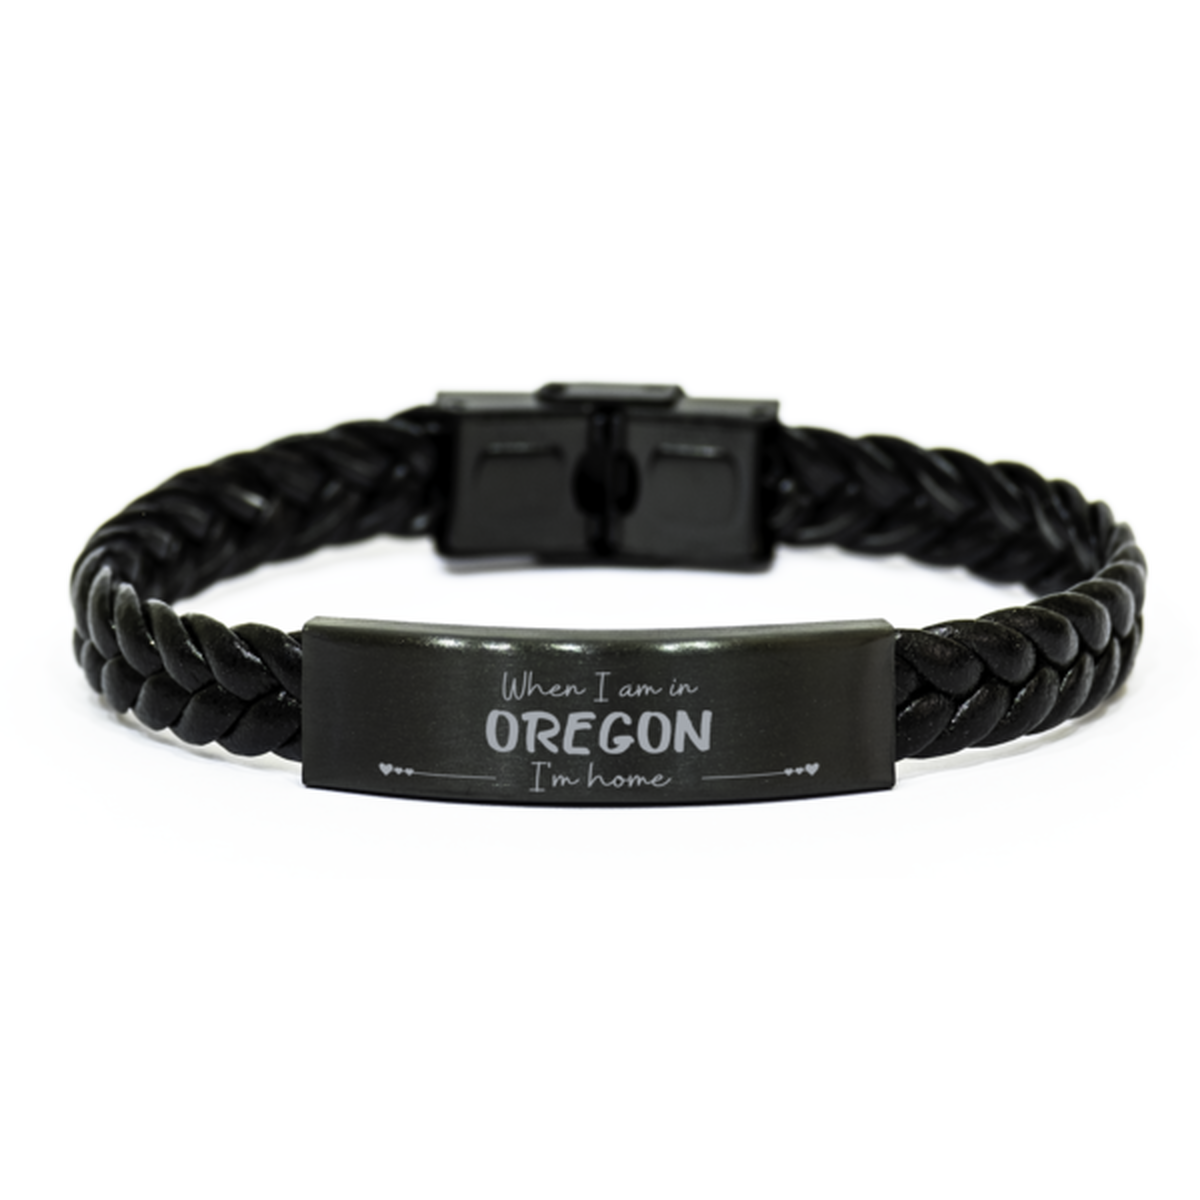 When I am in Oregon I'm home Braided Leather Bracelet, Cheap Gifts For Oregon, State Oregon Birthday Gifts for Friends Coworker